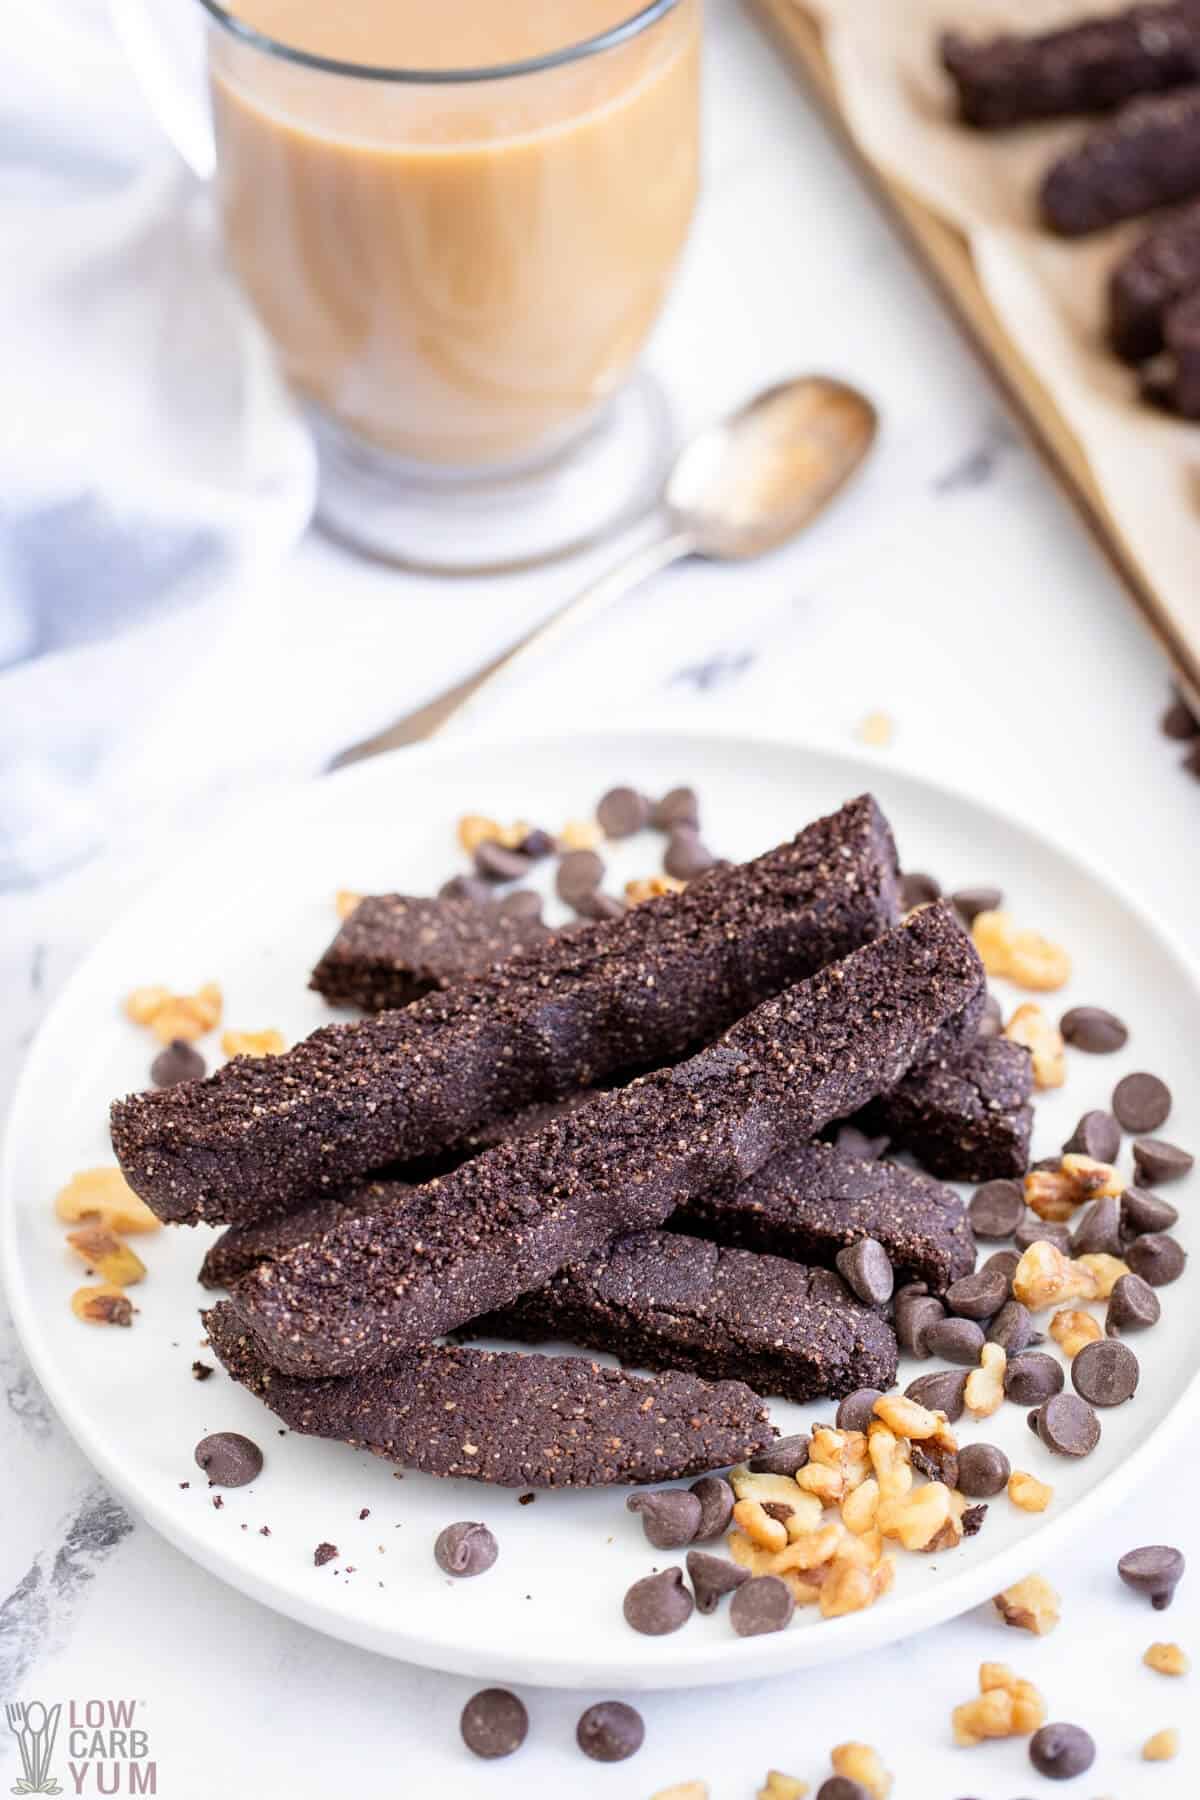 serving chocolate biscotti with coffee and chocolate chips